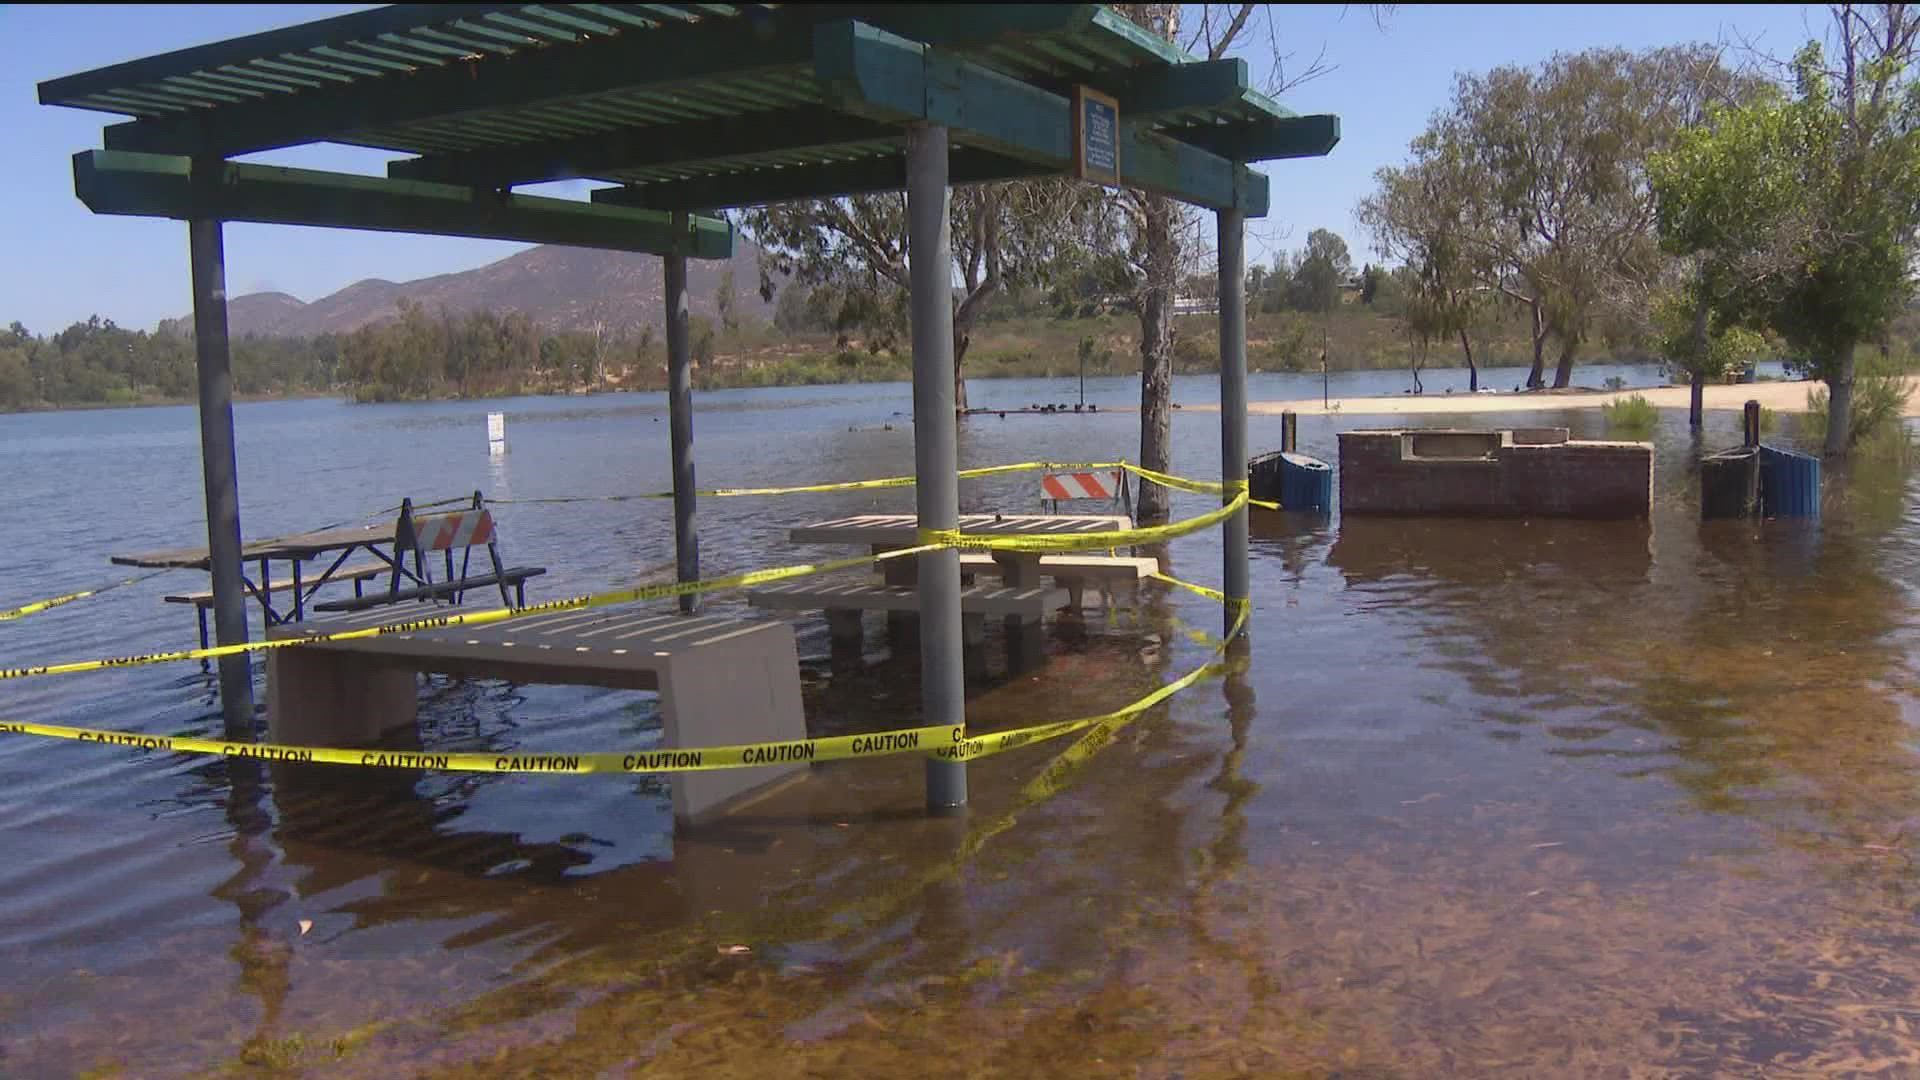 Lake Murray's water level is 3 to 4 feet above it's normal height which is impacting the entire shoreline.